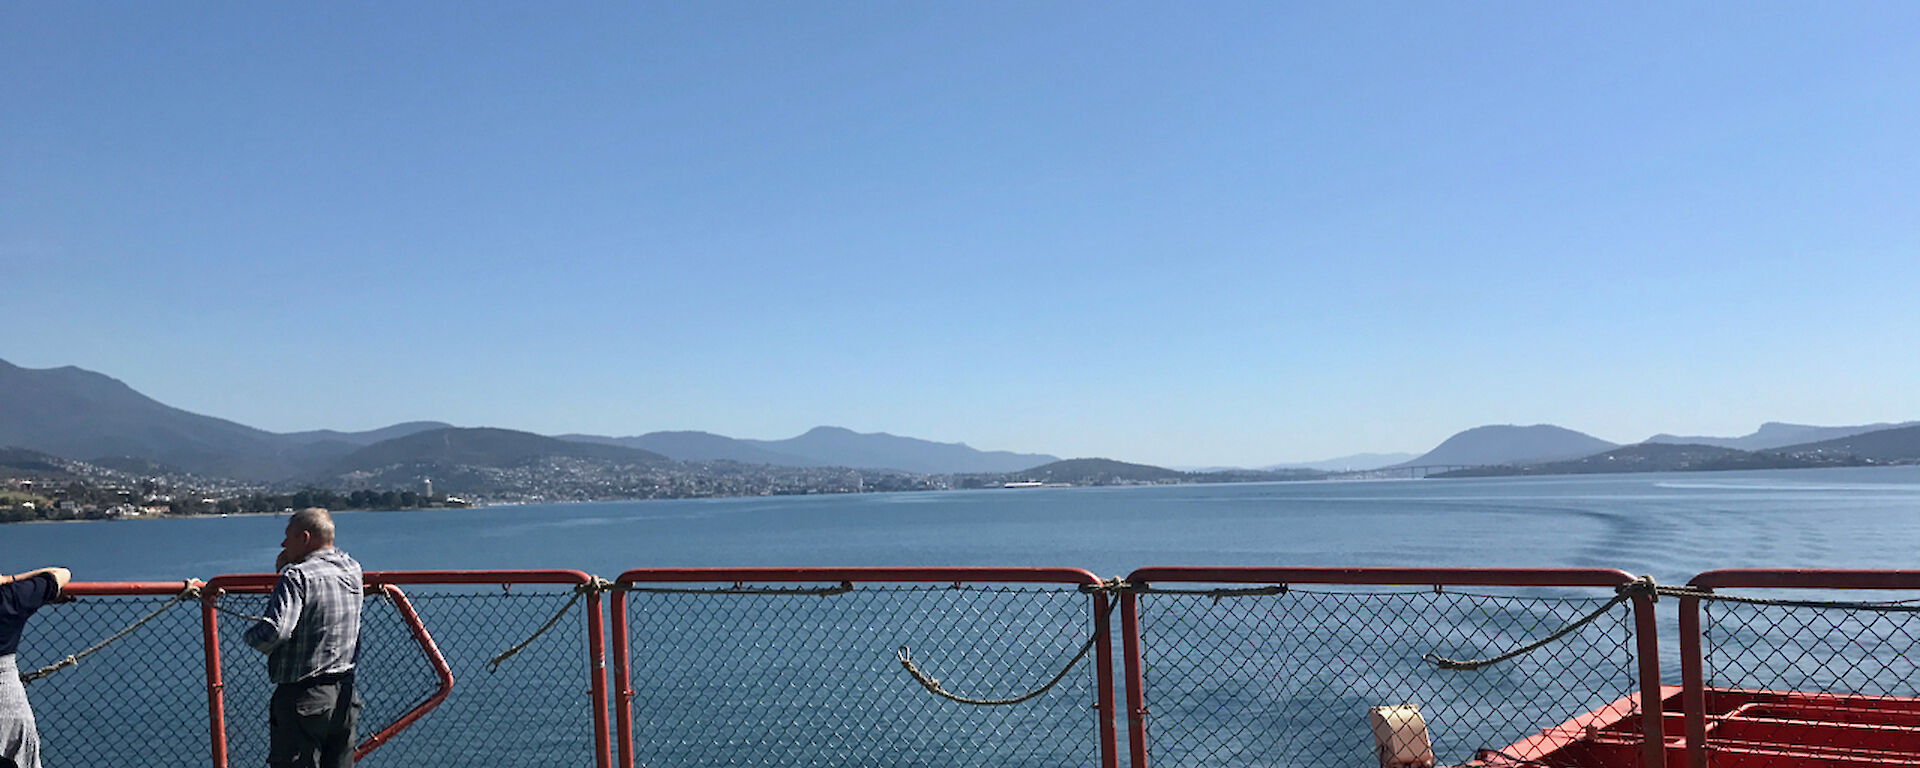 View of Hobart from rear deck of Aurora Australis